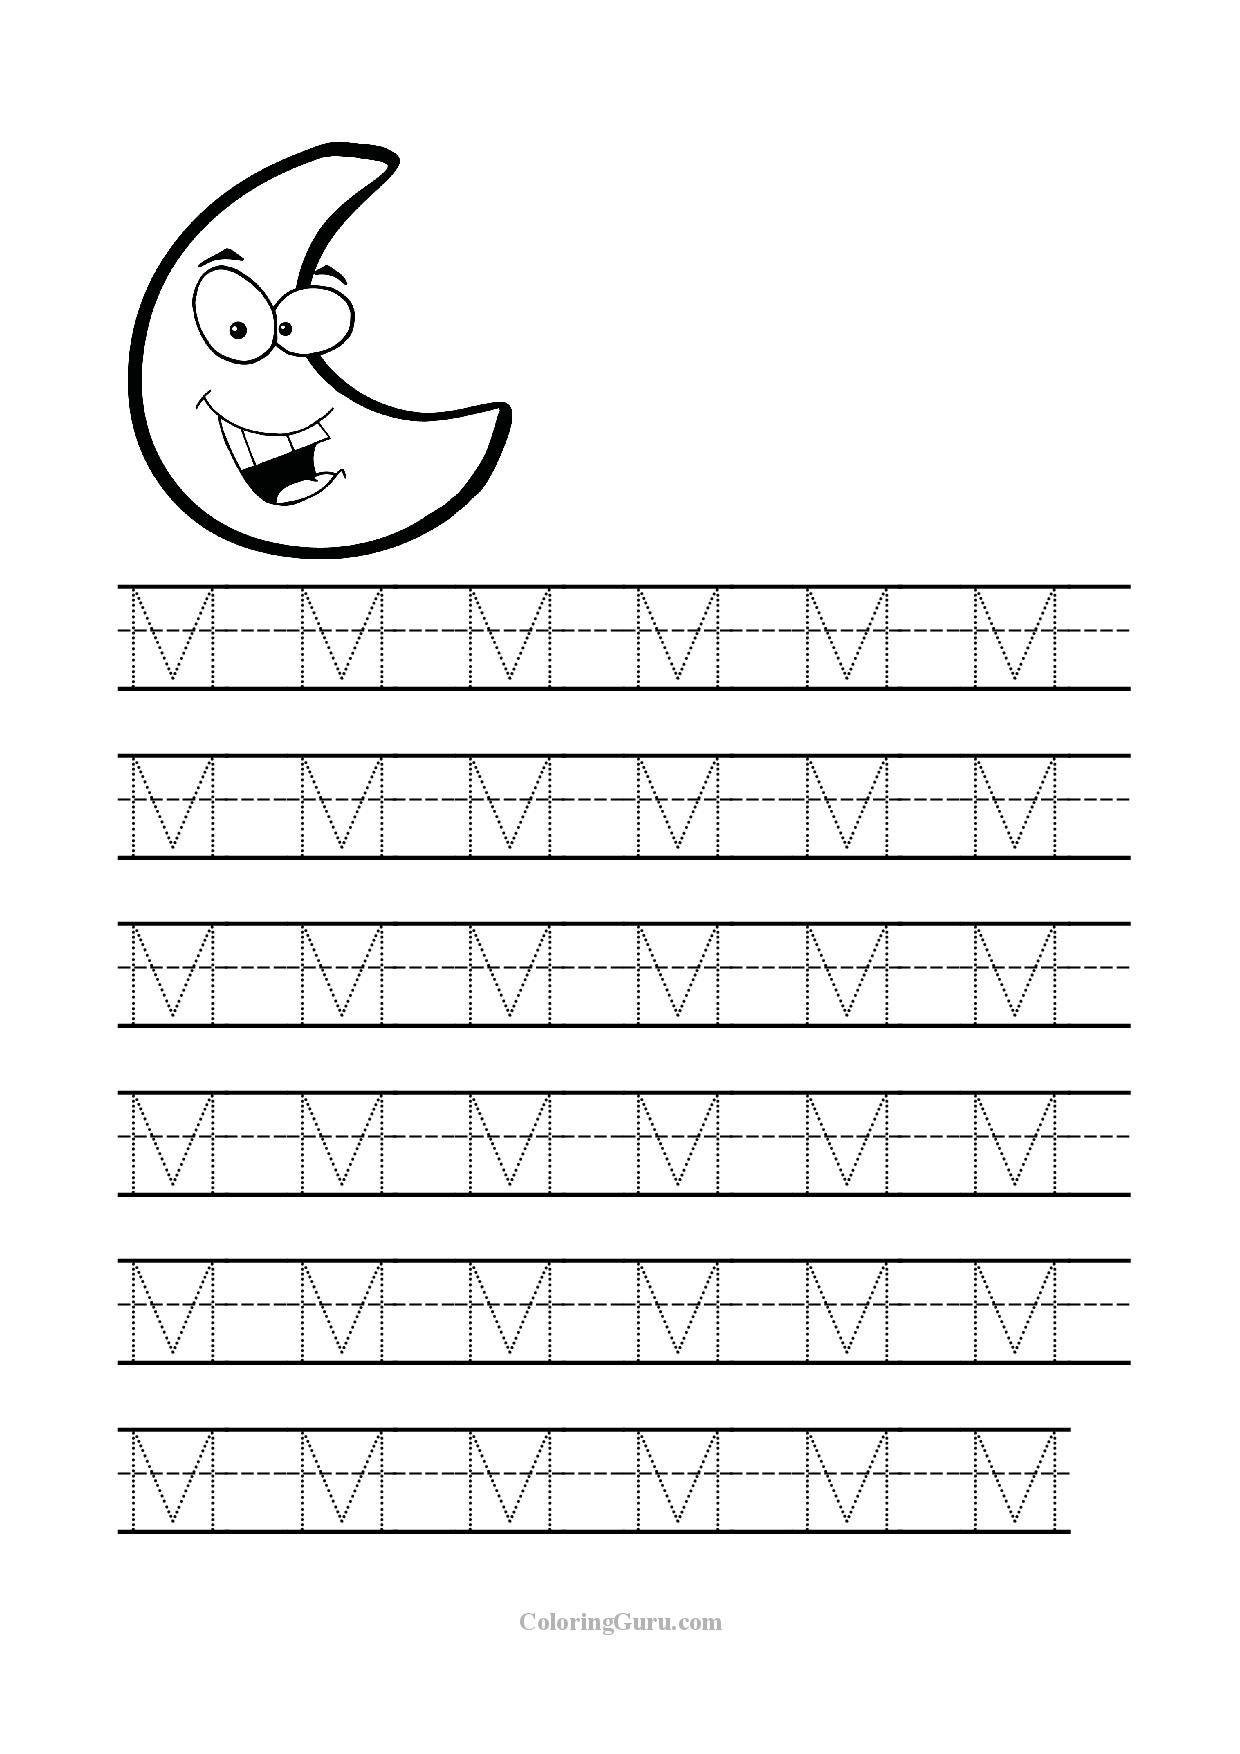 Free Printable Tracing Letter M Worksheets For Preschool inside Preschool Dotted Letters For Tracing